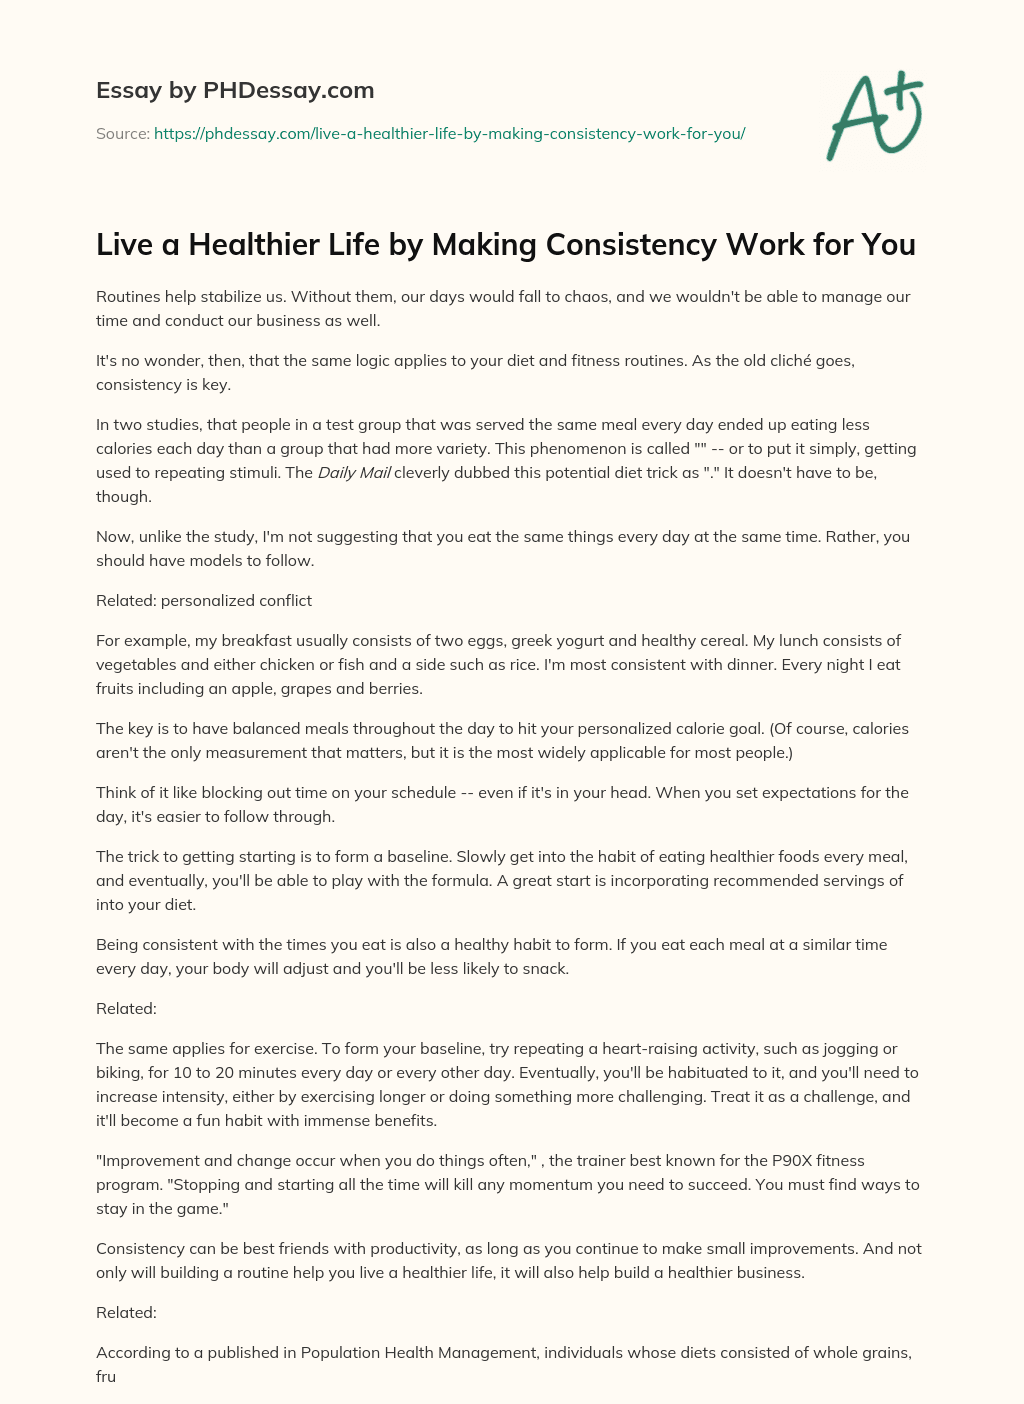 Live a Healthier Life by Making Consistency Work for You essay